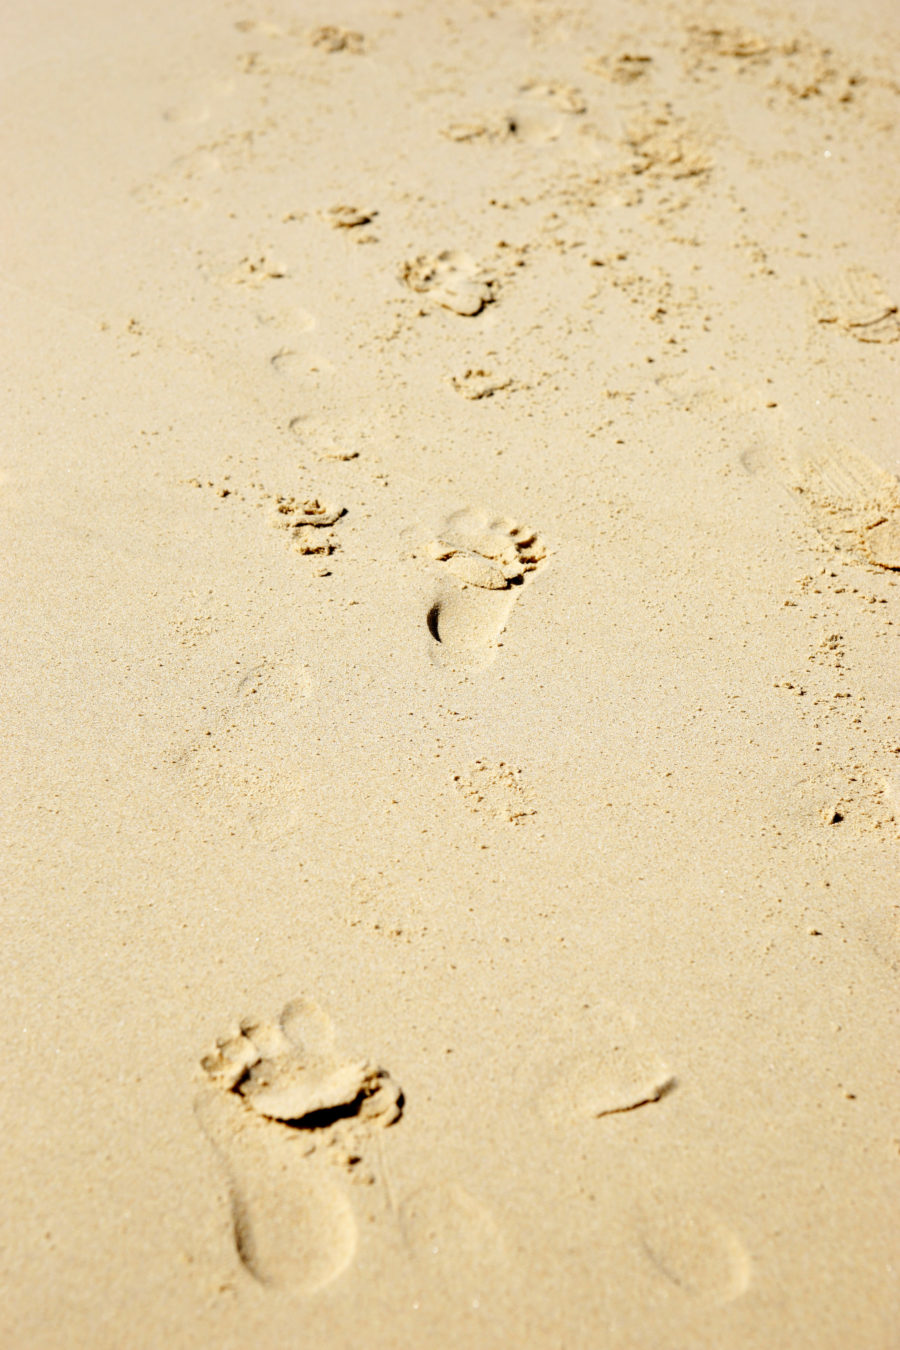 Two more background photos of footprints in the sand